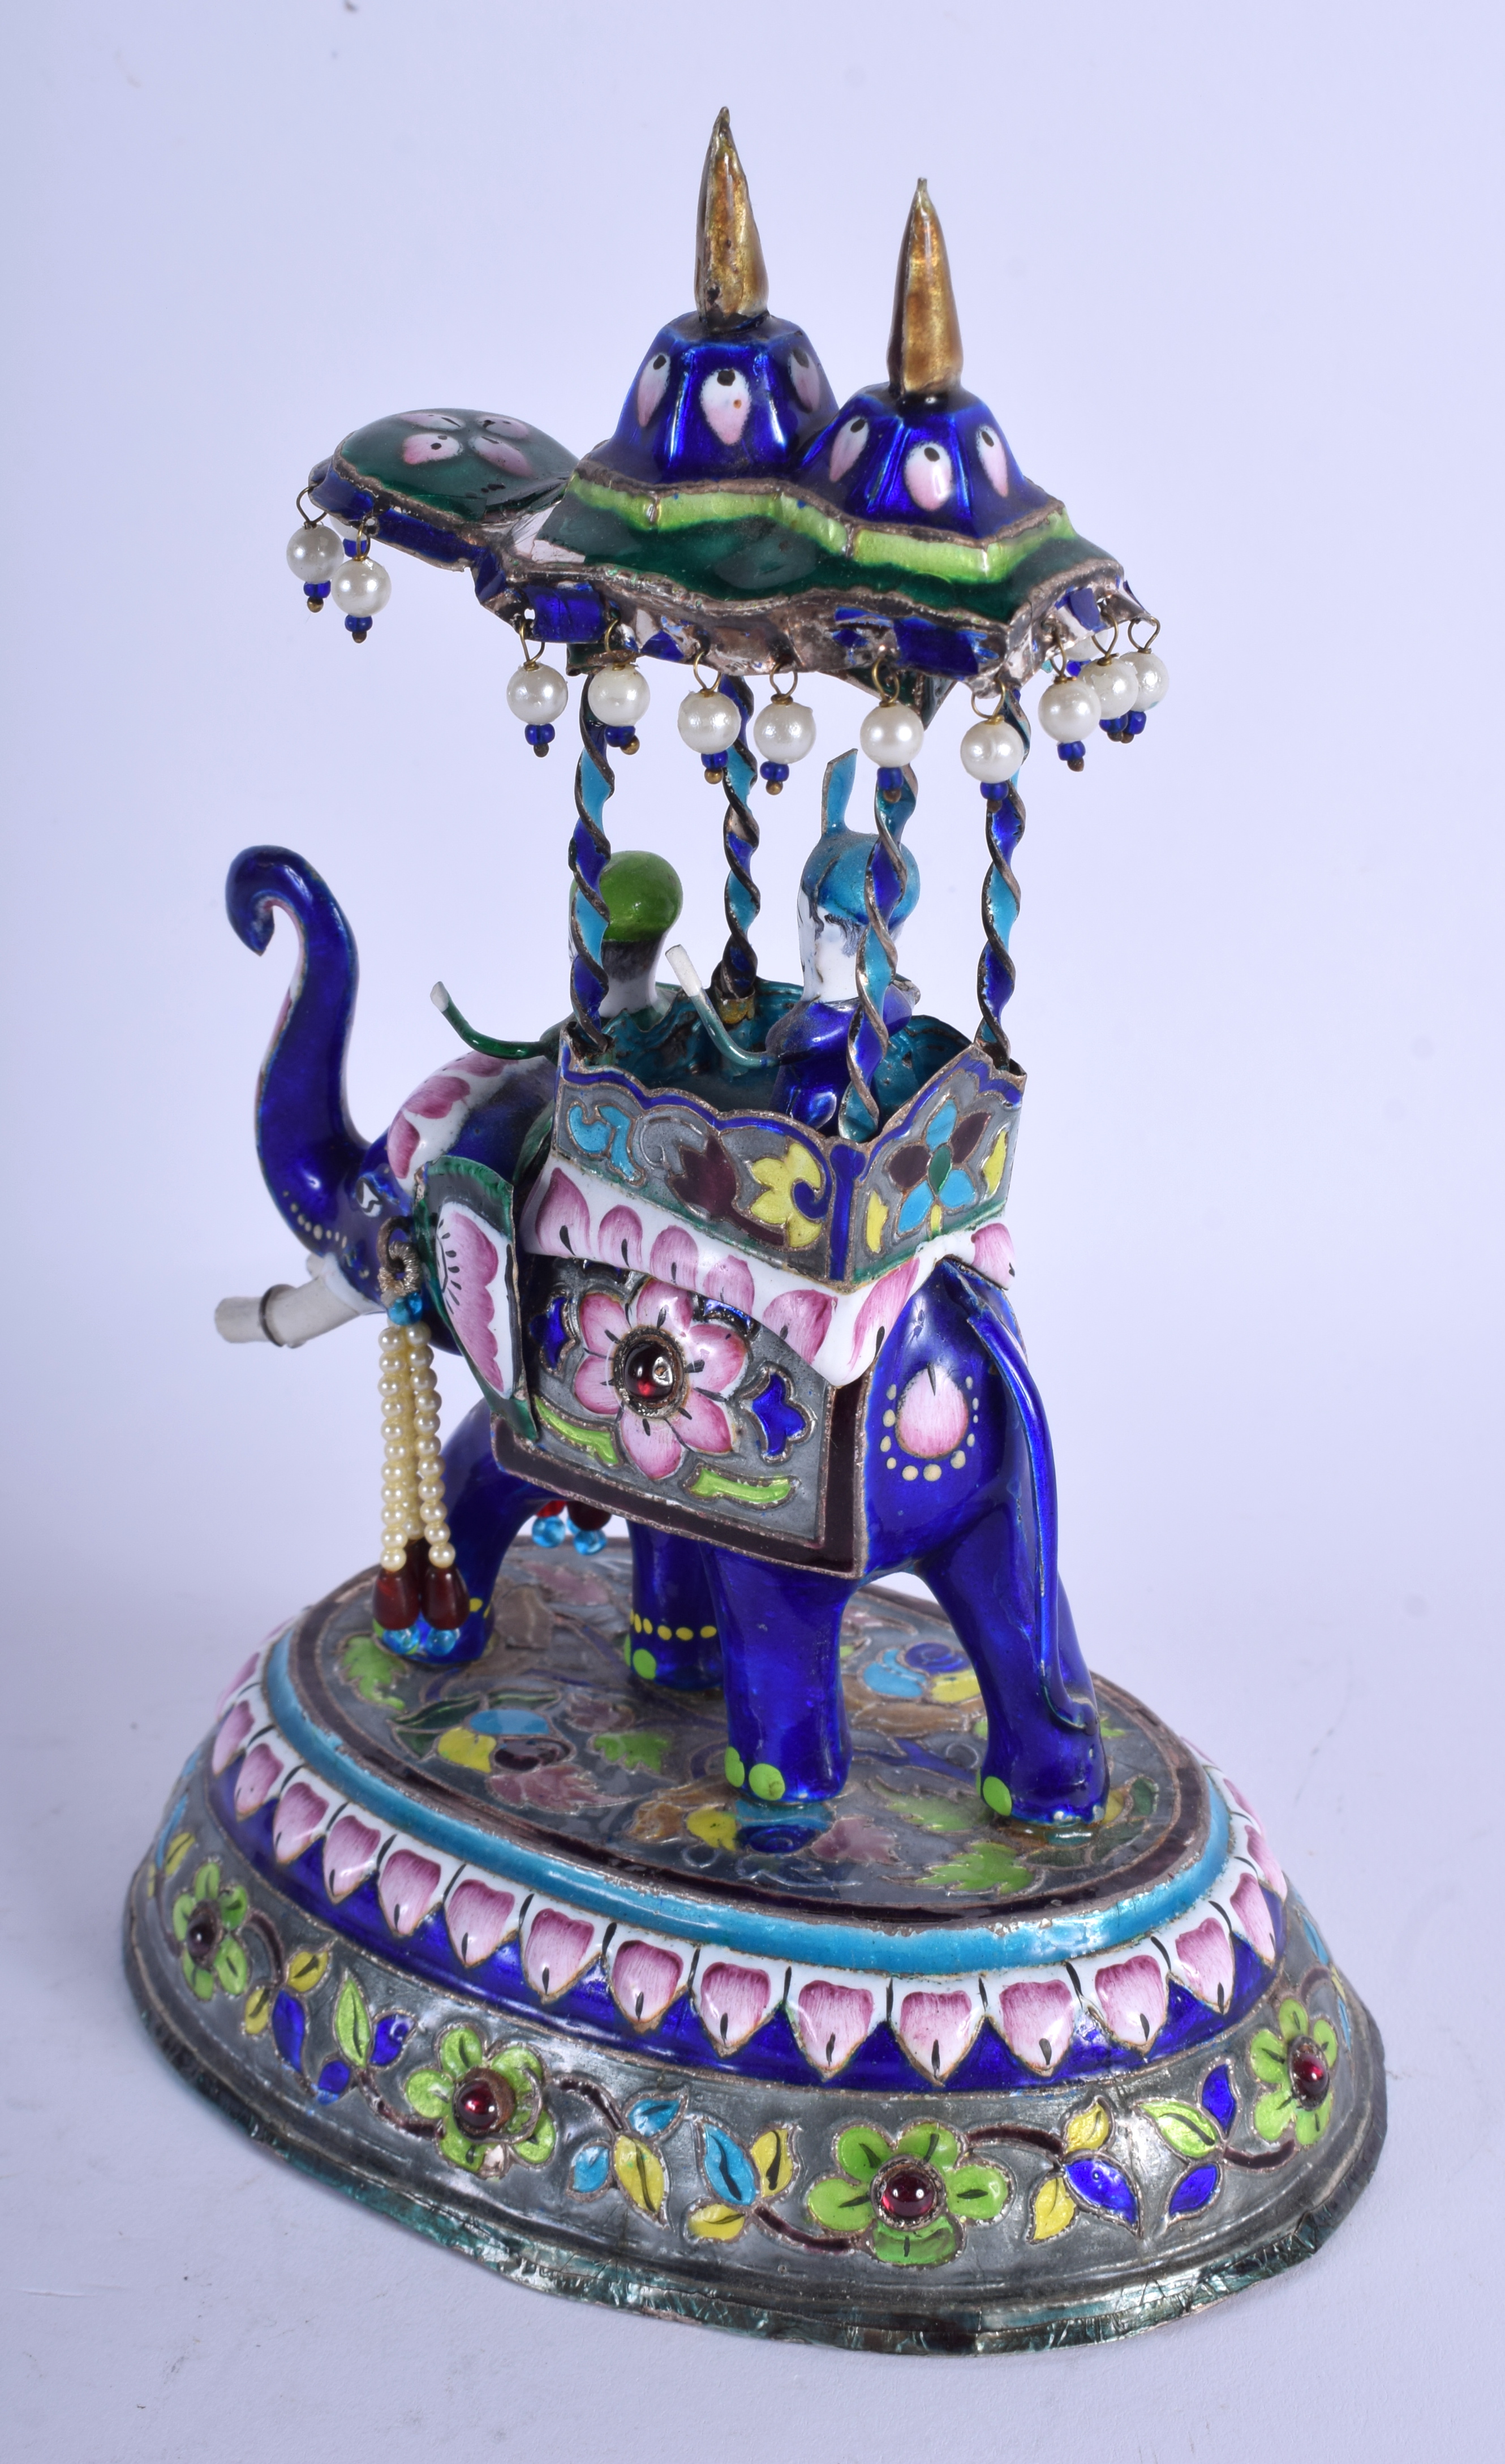 AN EARLY 20TH CENTURY INDIAN SILVER AND ENAMEL FIGURE OF AN ELEPHANT. 652 grams. 19 cm x 11 cm. - Image 2 of 3